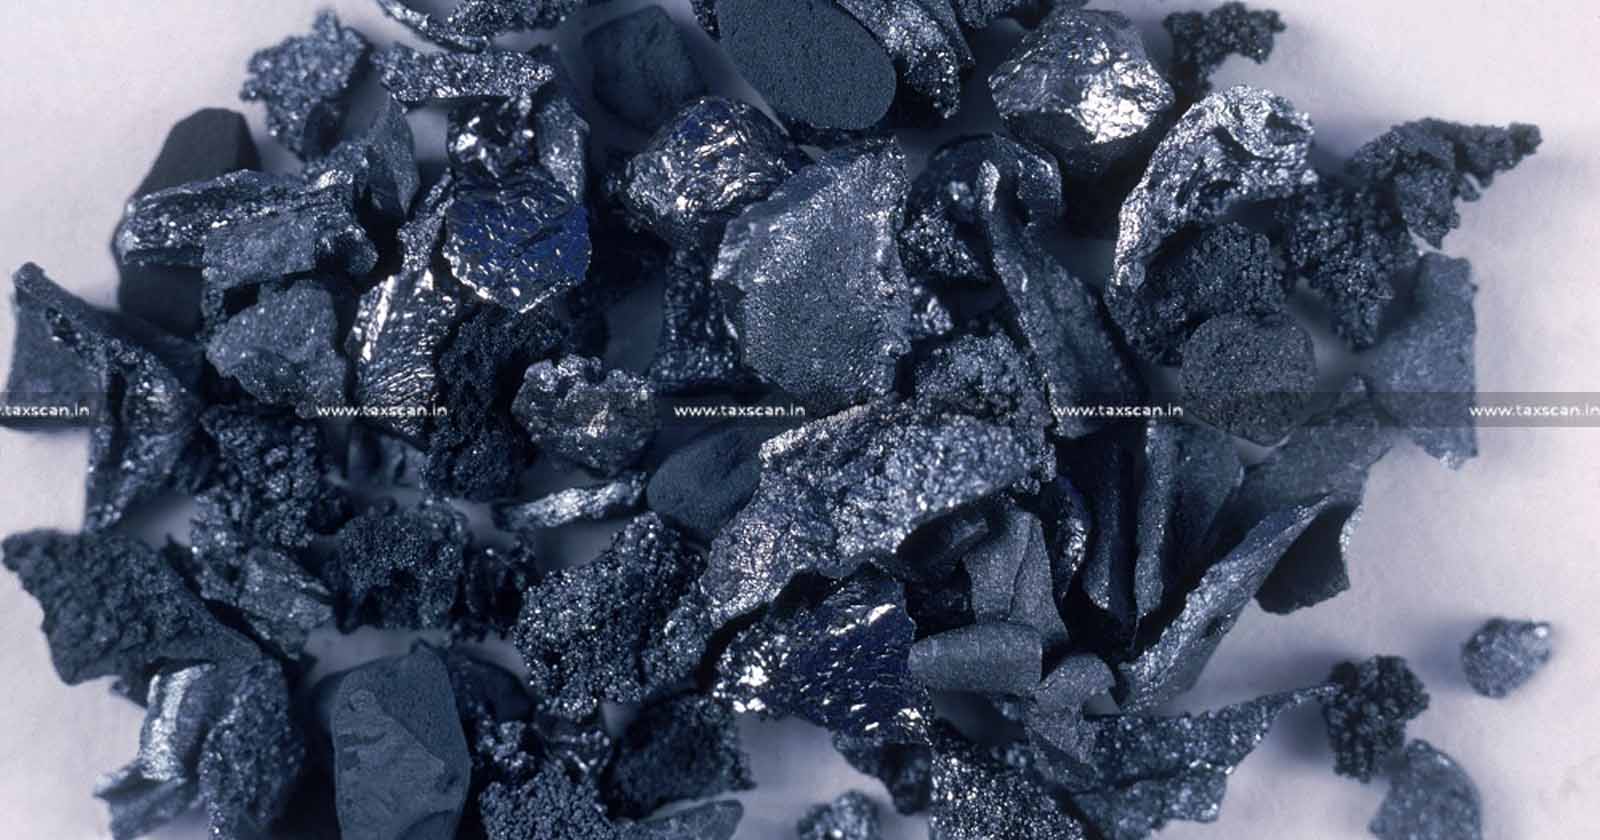 Boron Ore - Rely on Website and Wikipedia - Website and Wikipedia - Test Report - CESTAT - Customs Duty Exemption - Customs Duty - Customs Duty Exemption to Boron Ore - Service Tax - Customs - Excise - Taxscan